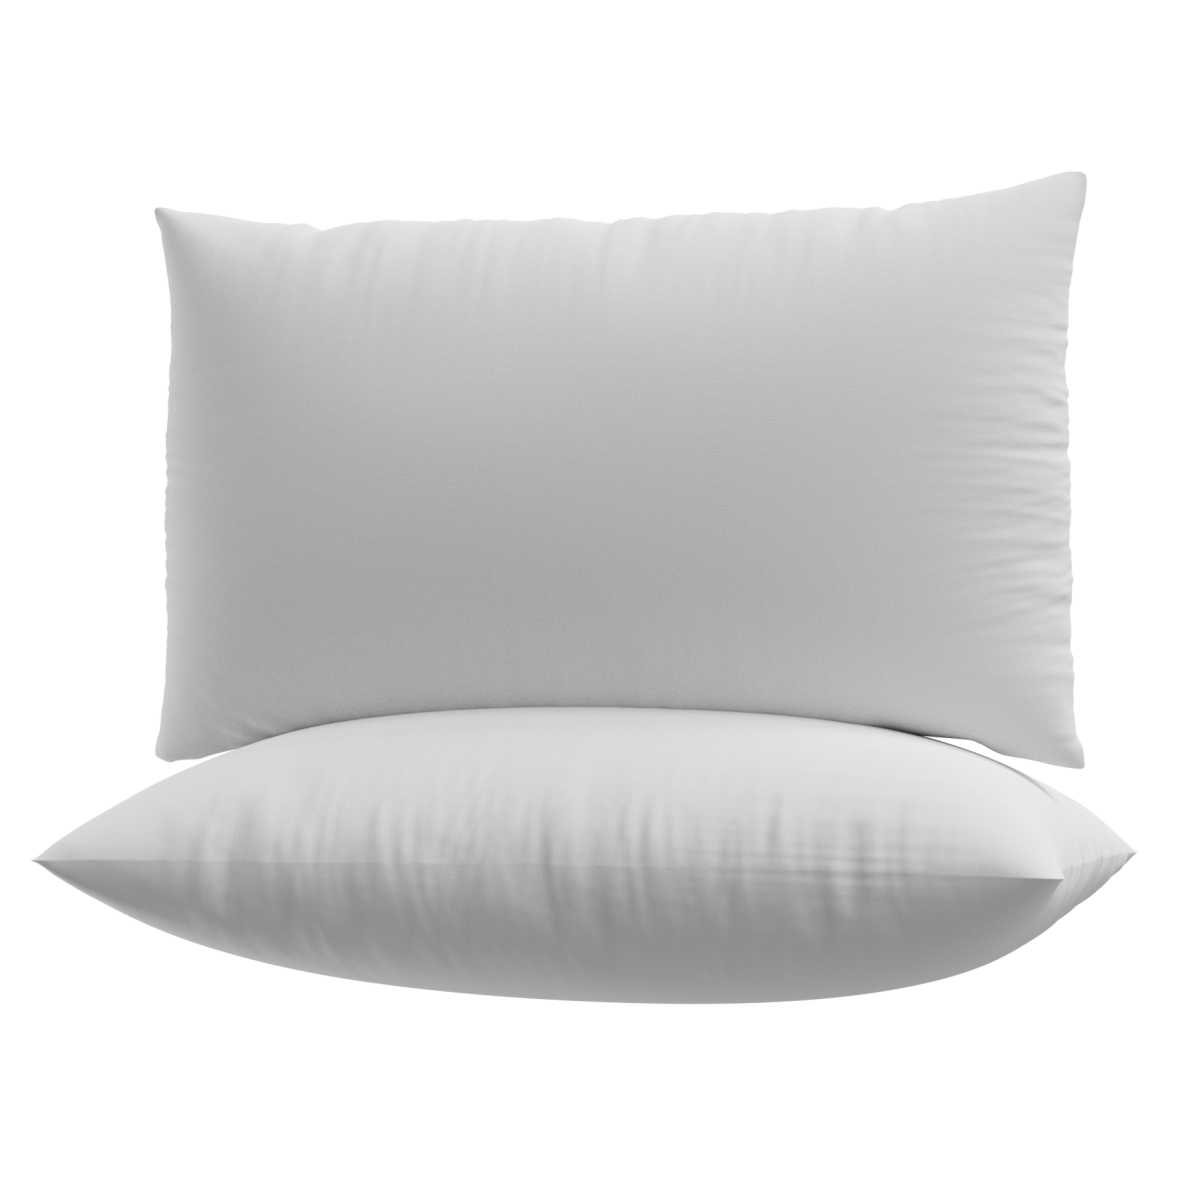  Utopia Bedding Throw Pillows Insert (Pack of 2, White) - 12 x  12 Inches Bed and Couch Pillows - Indoor Decorative Pillows : Home & Kitchen